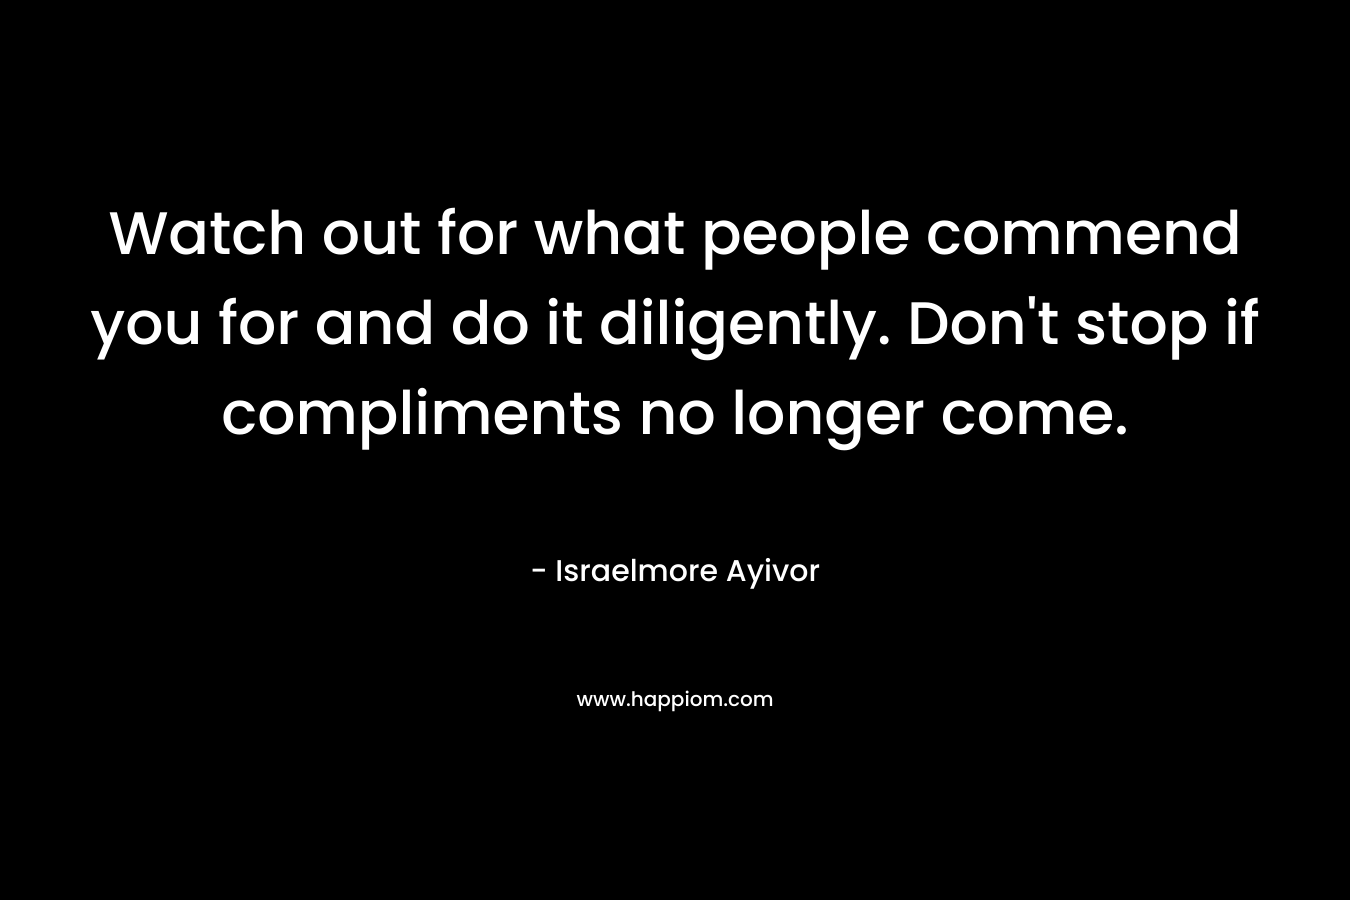 Watch out for what people commend you for and do it diligently. Don't stop if compliments no longer come.